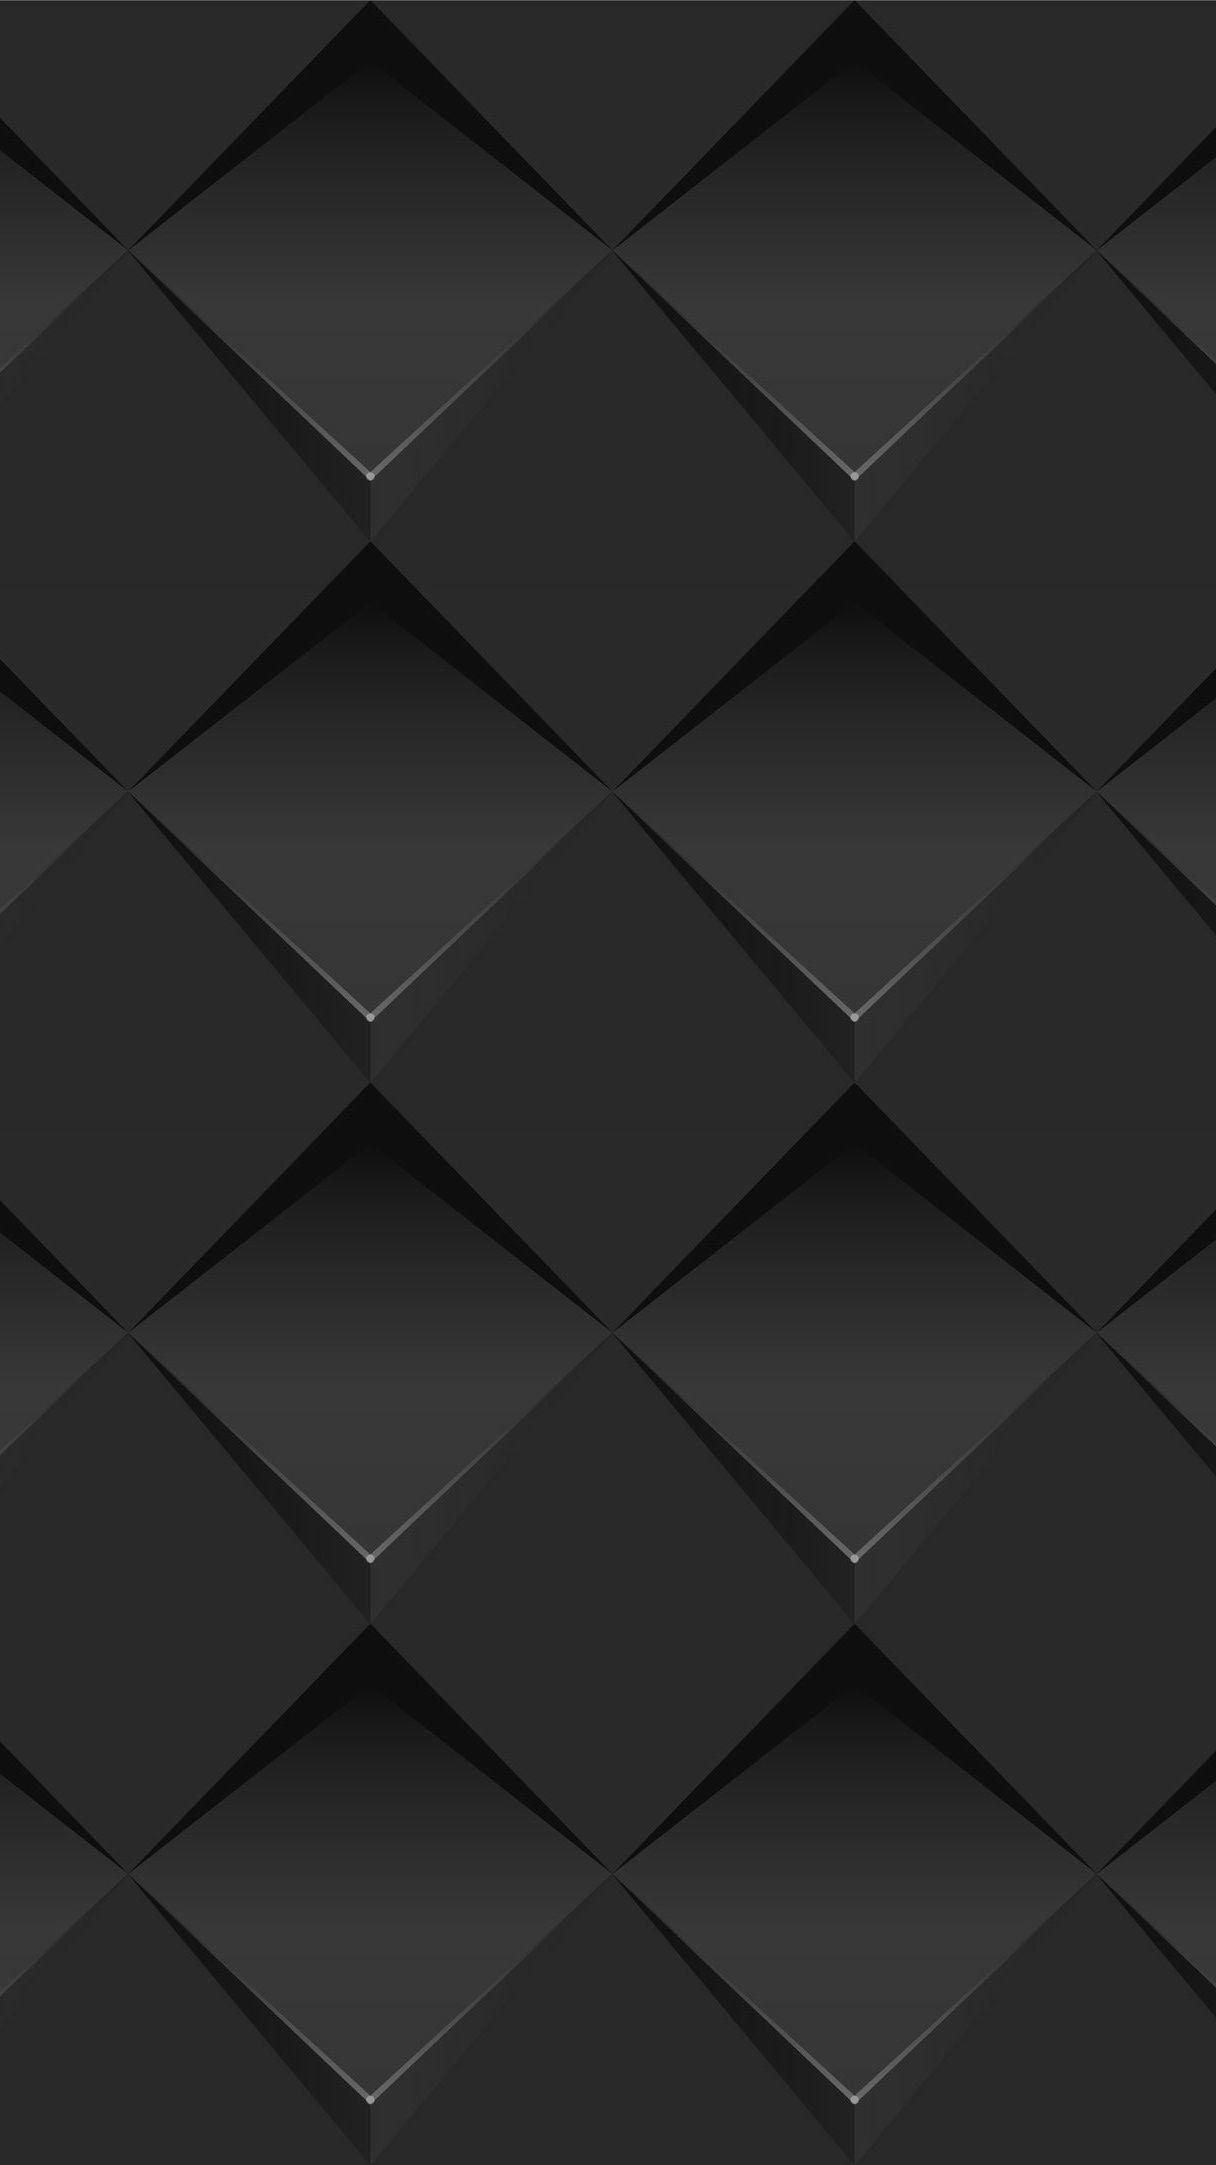 Geometric  IPhone Wallpapers  iPhone Wallpapers